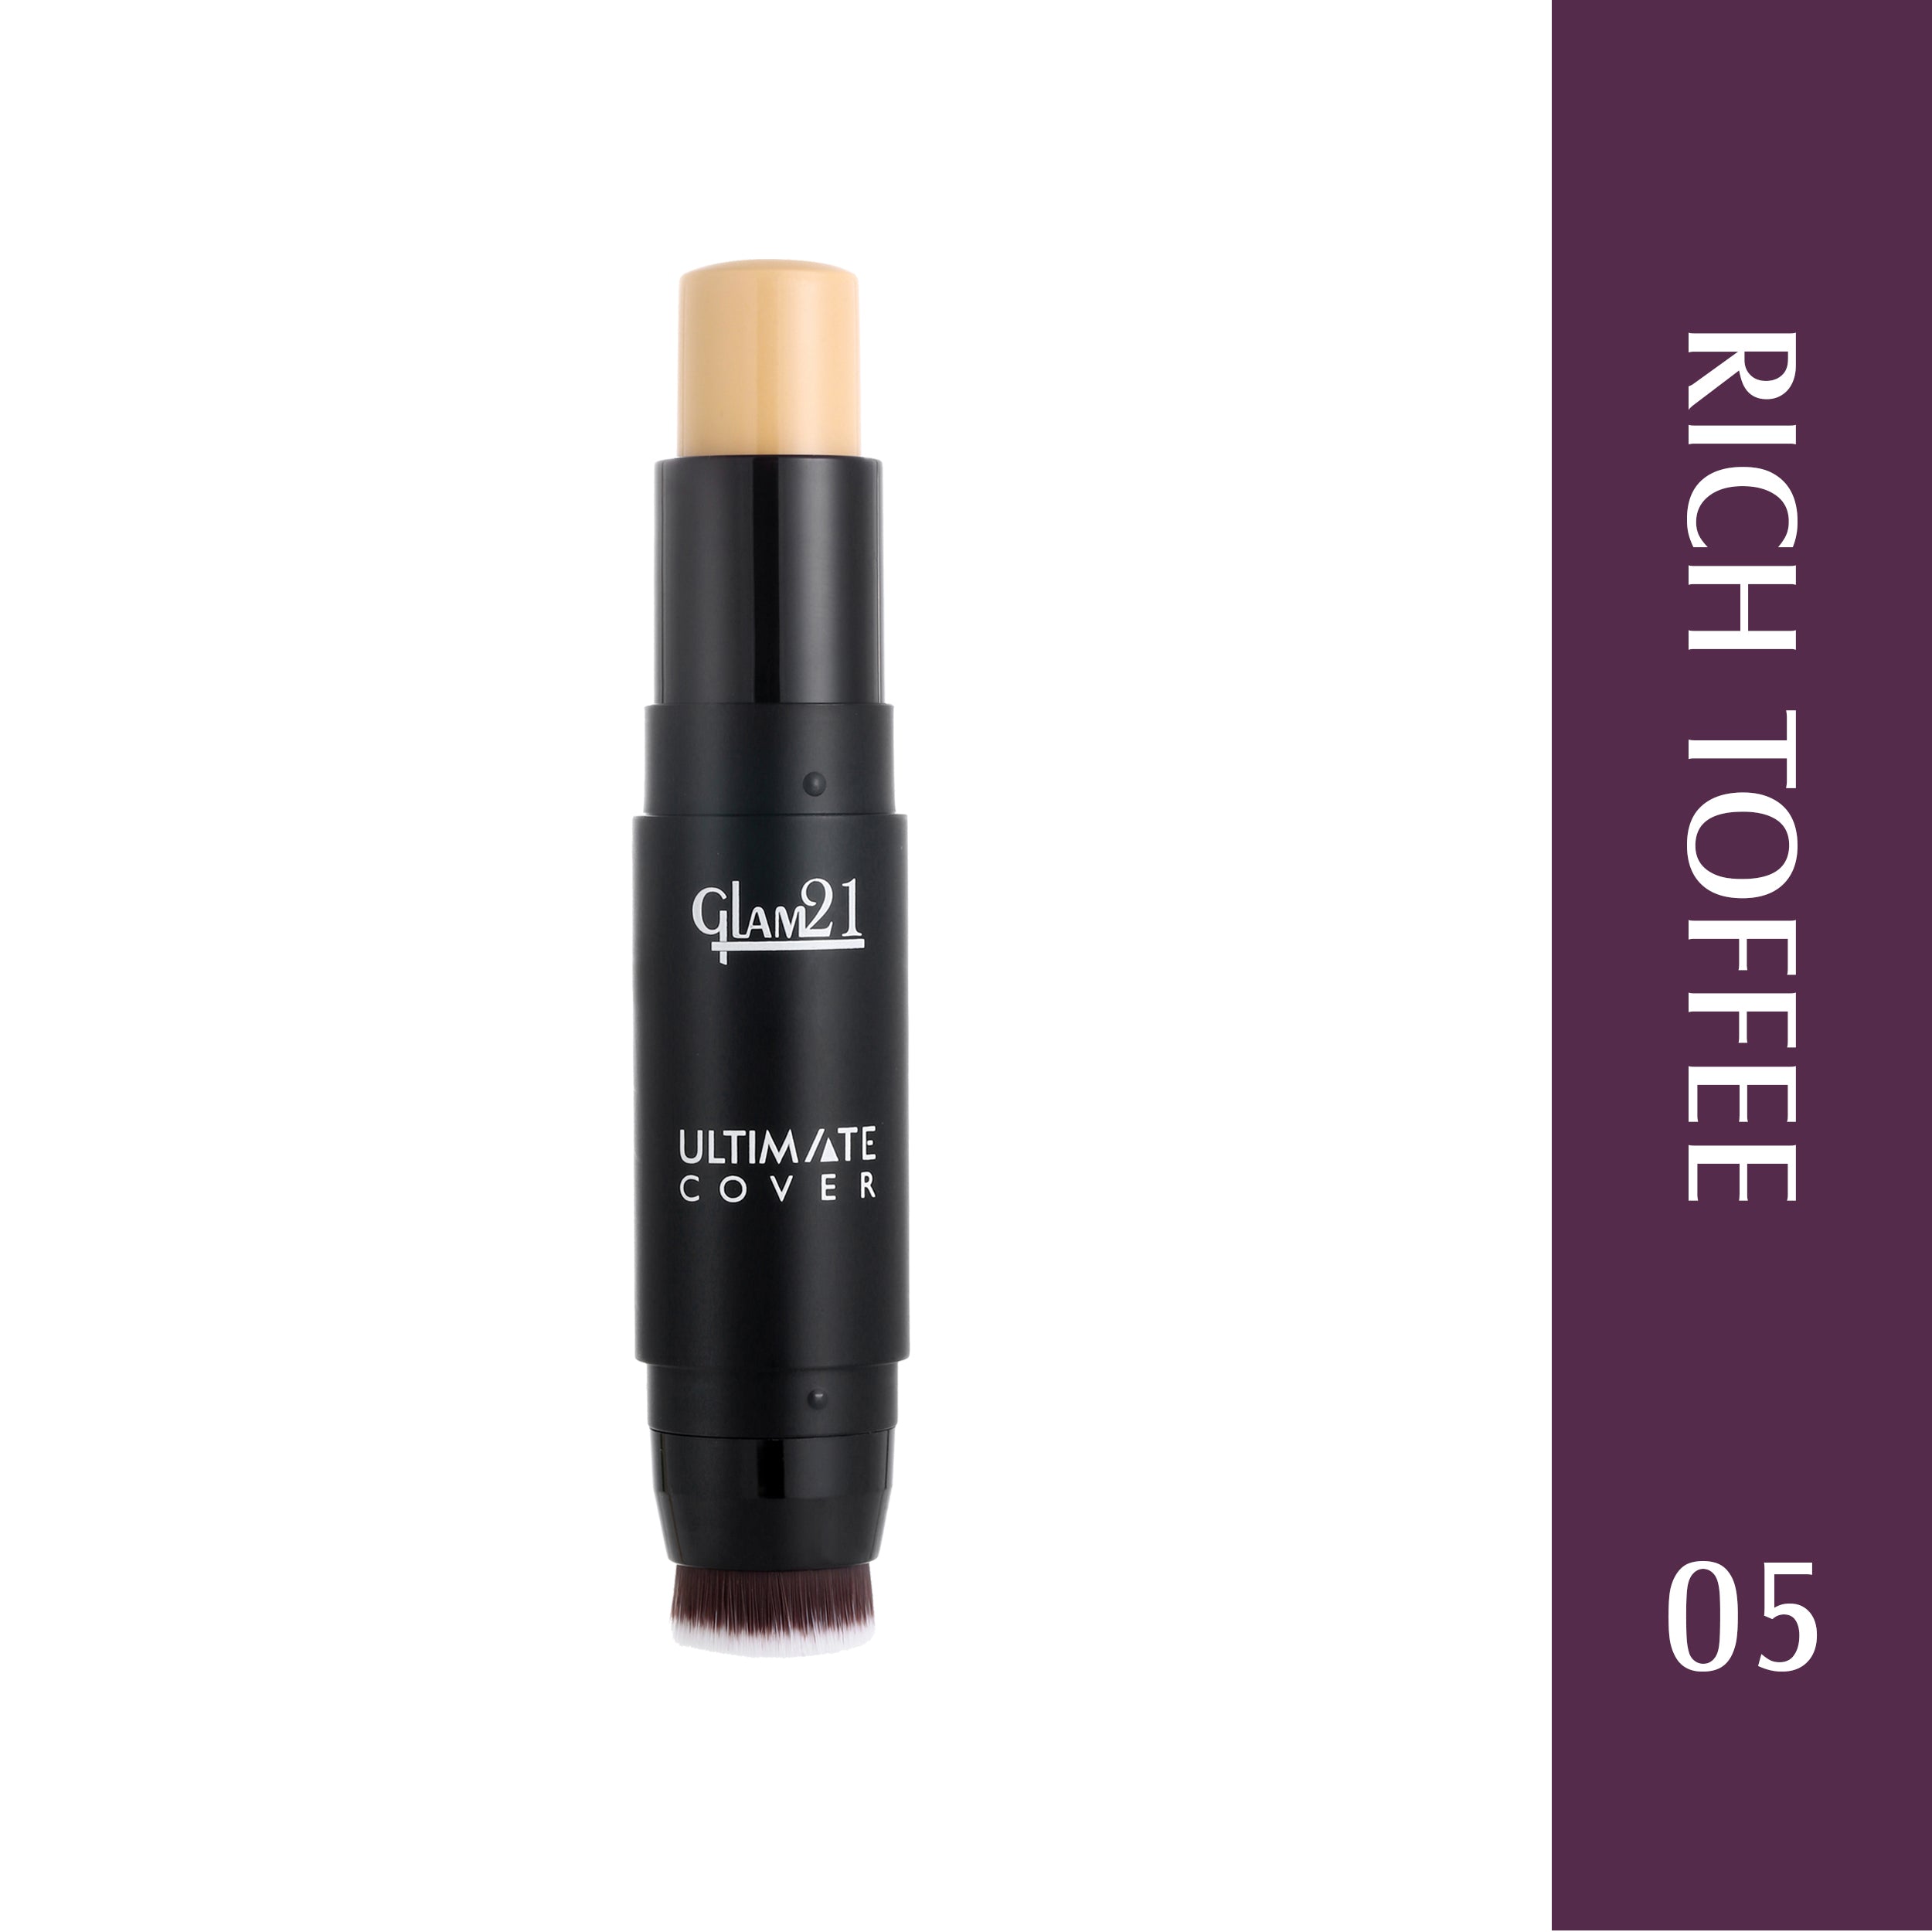 Glam21 Ultimate Cover Foundation Stick Easy to Blend & Gives Matte Finish upto 12 Hours Foundation (05-Rich Toffee, 8 g)